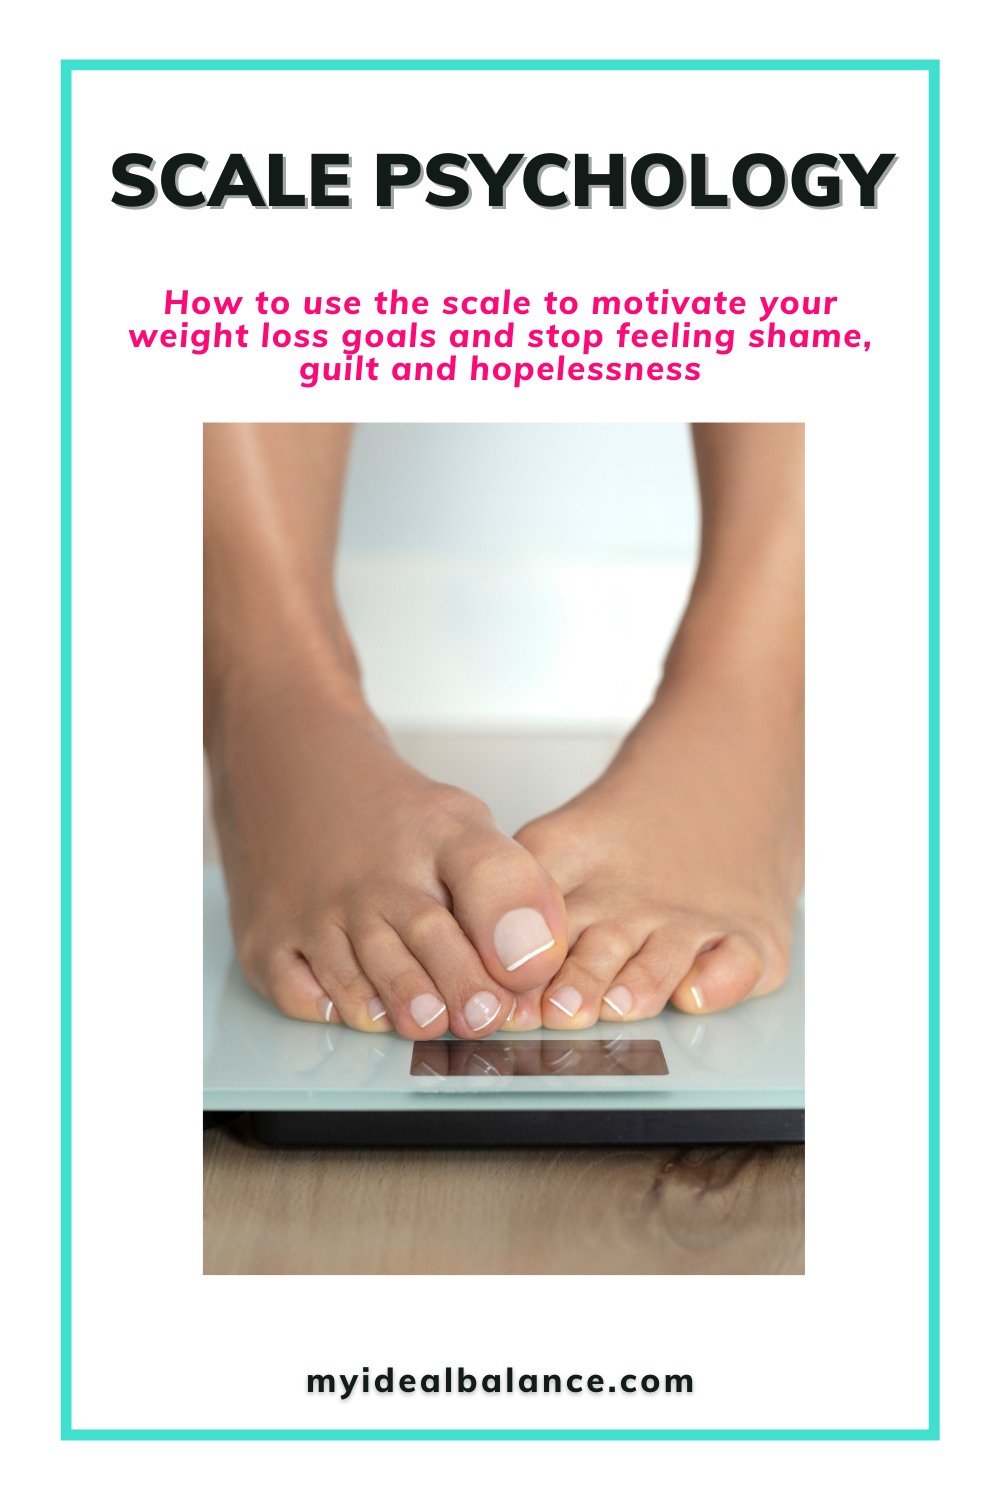 How to use the scale to motivate your weight loss goals and stop feeling shame, guilt and hopelessness